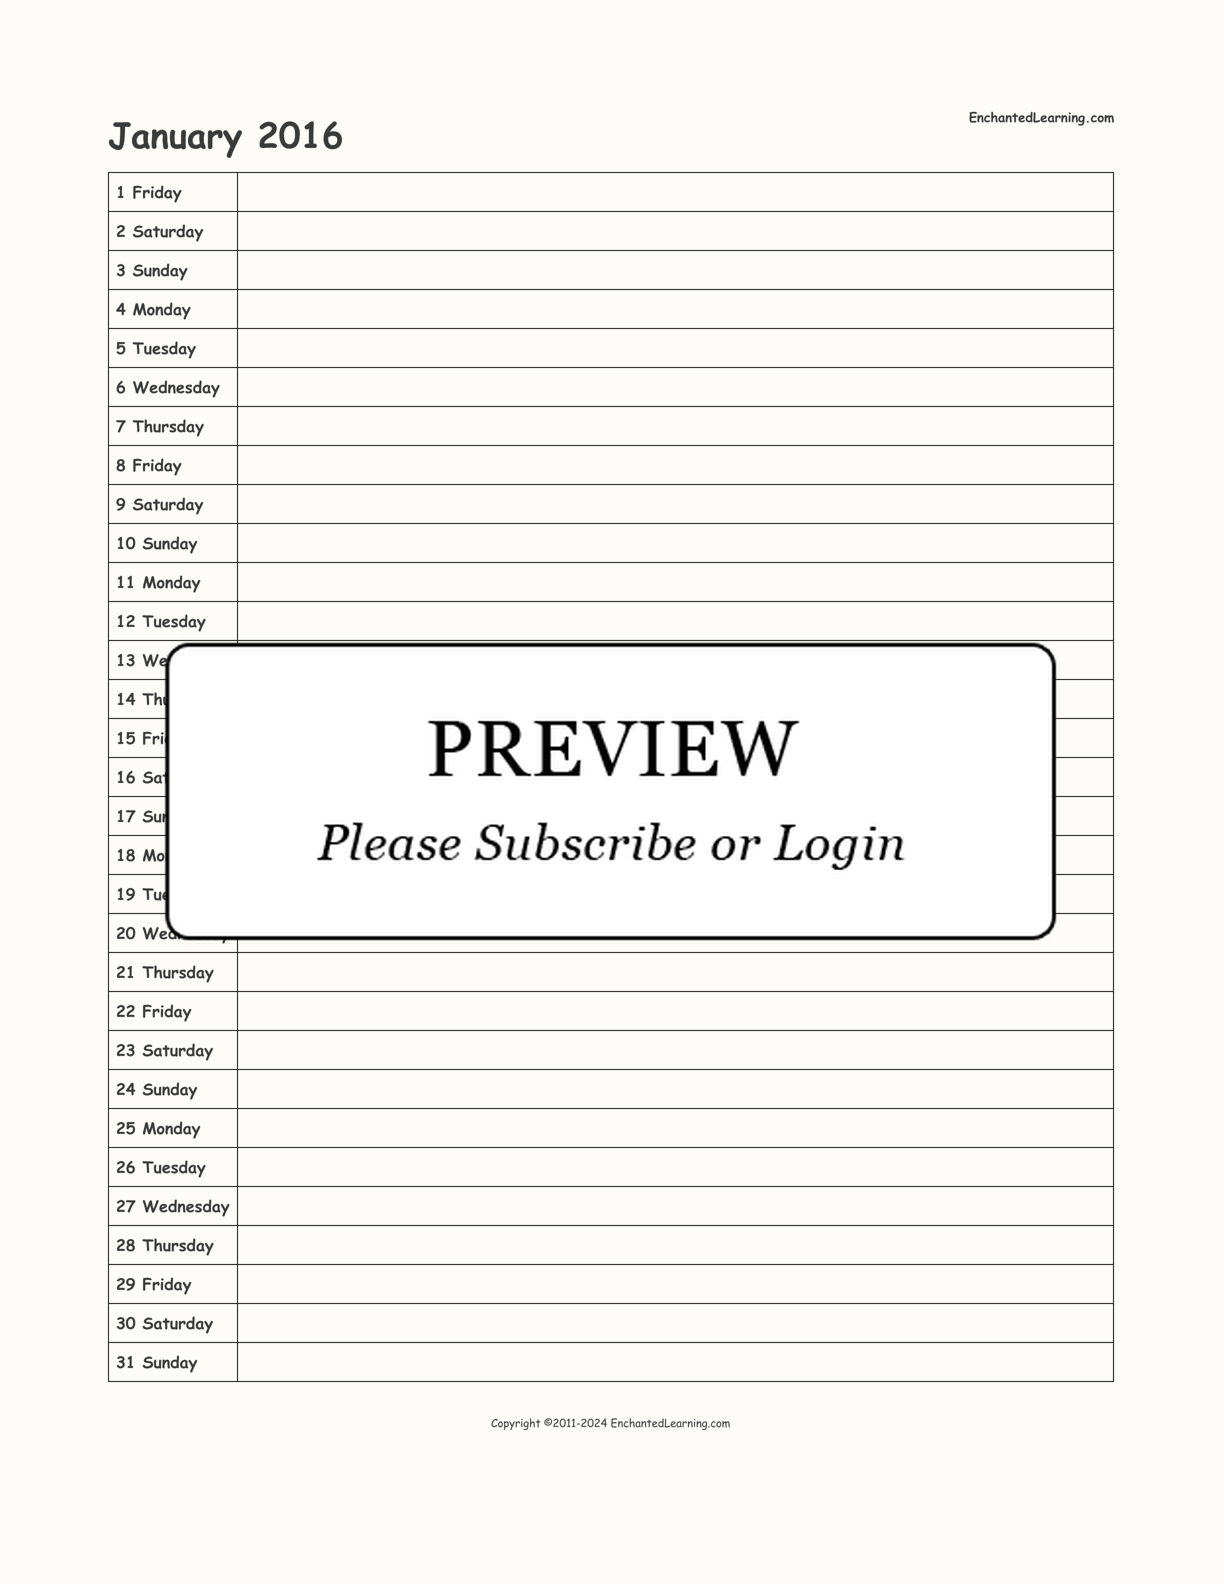 2016 Scheduling Calendar interactive printout page 1